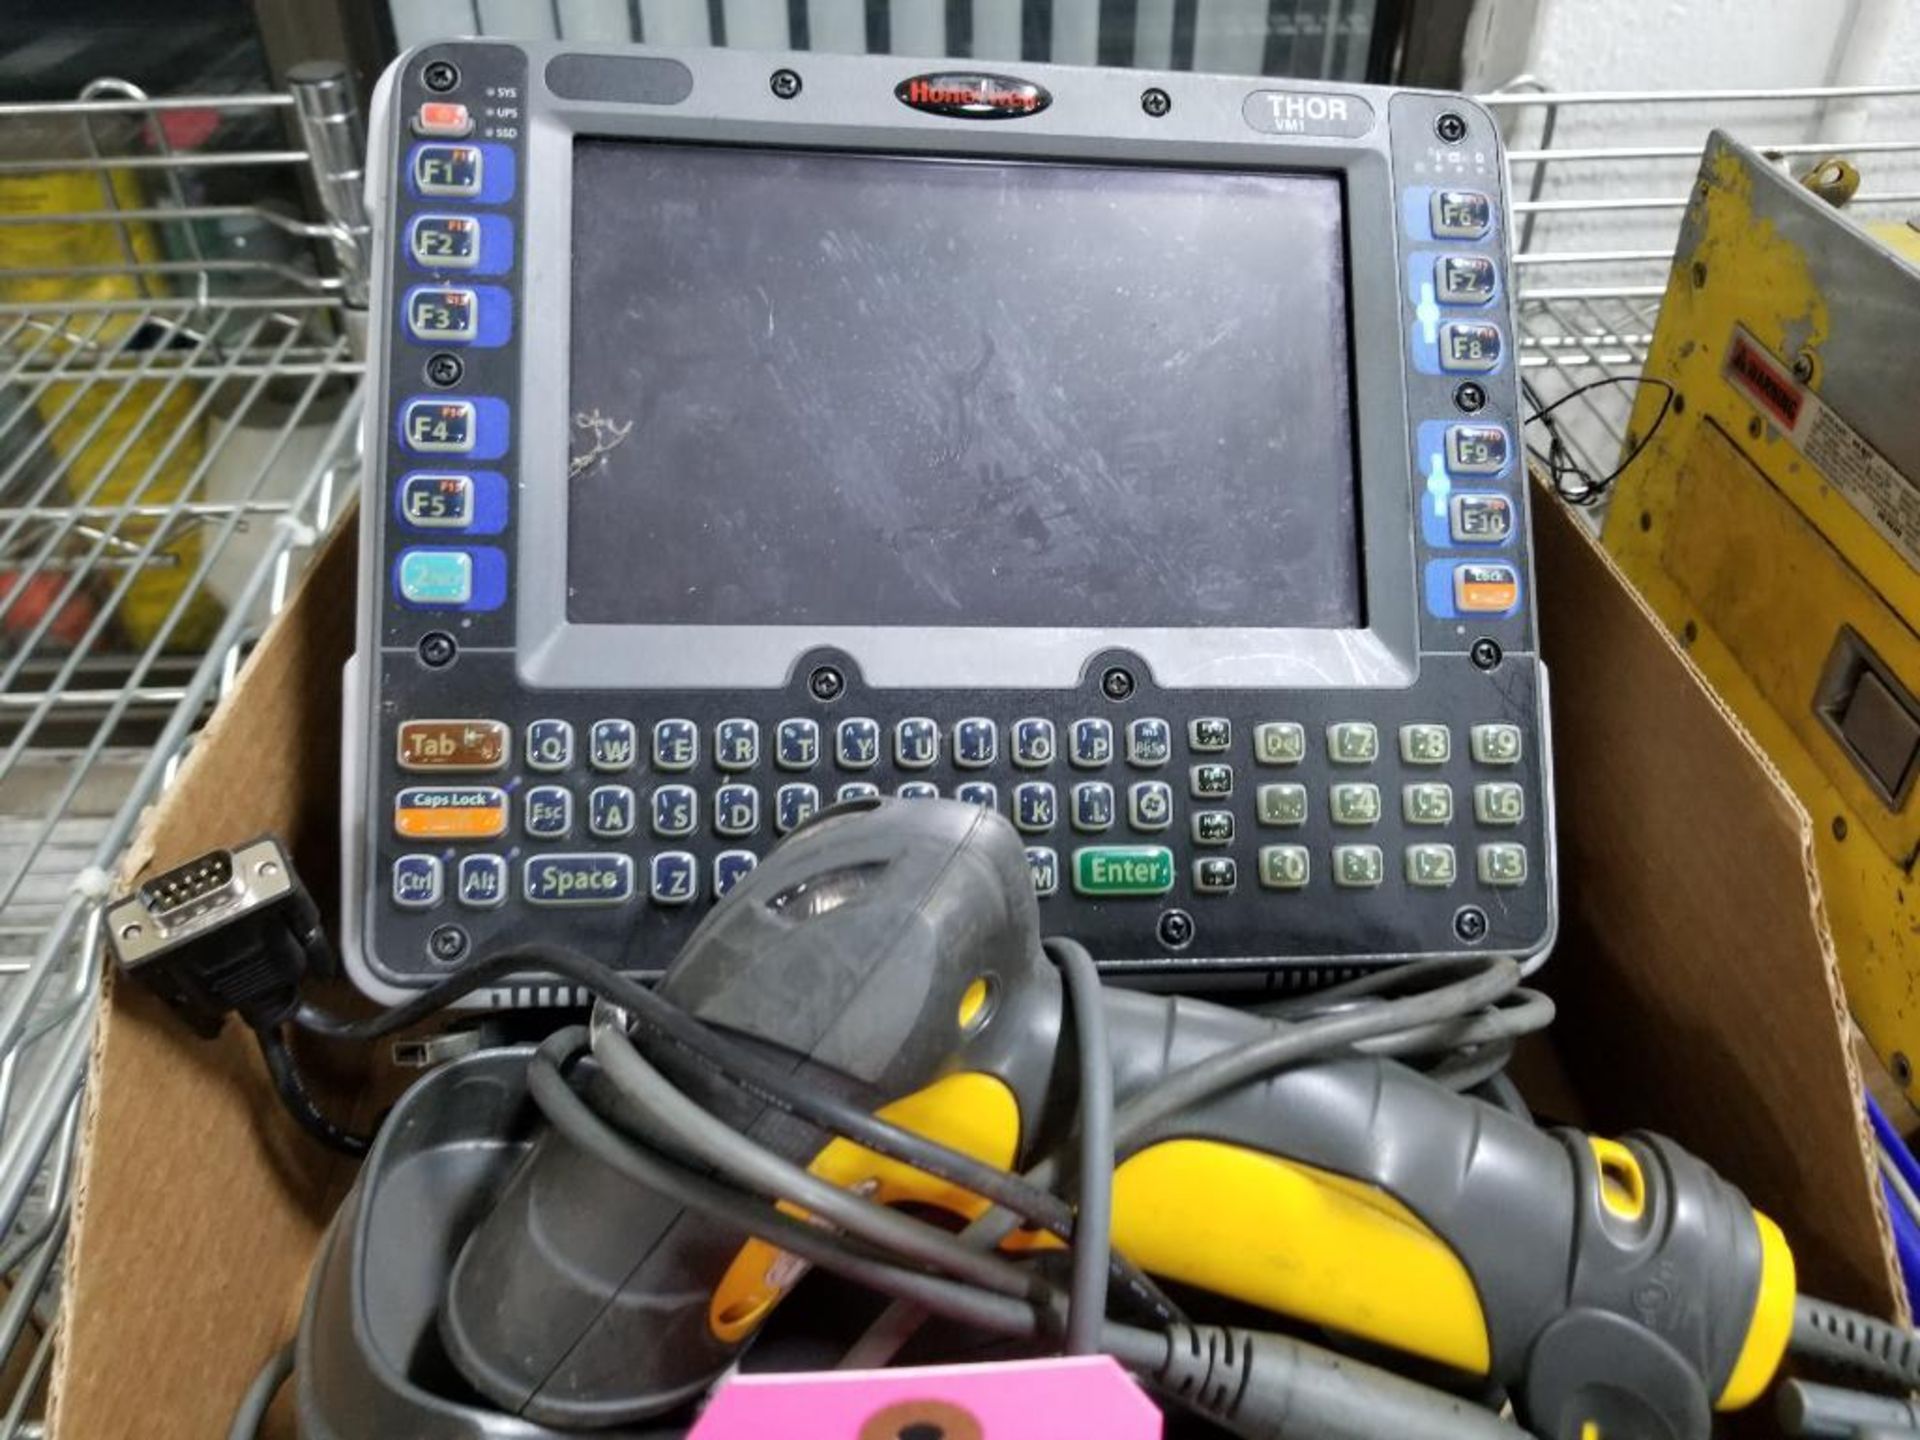 Honeywell Thor inventory system. Model VM1D with symbol scanner.